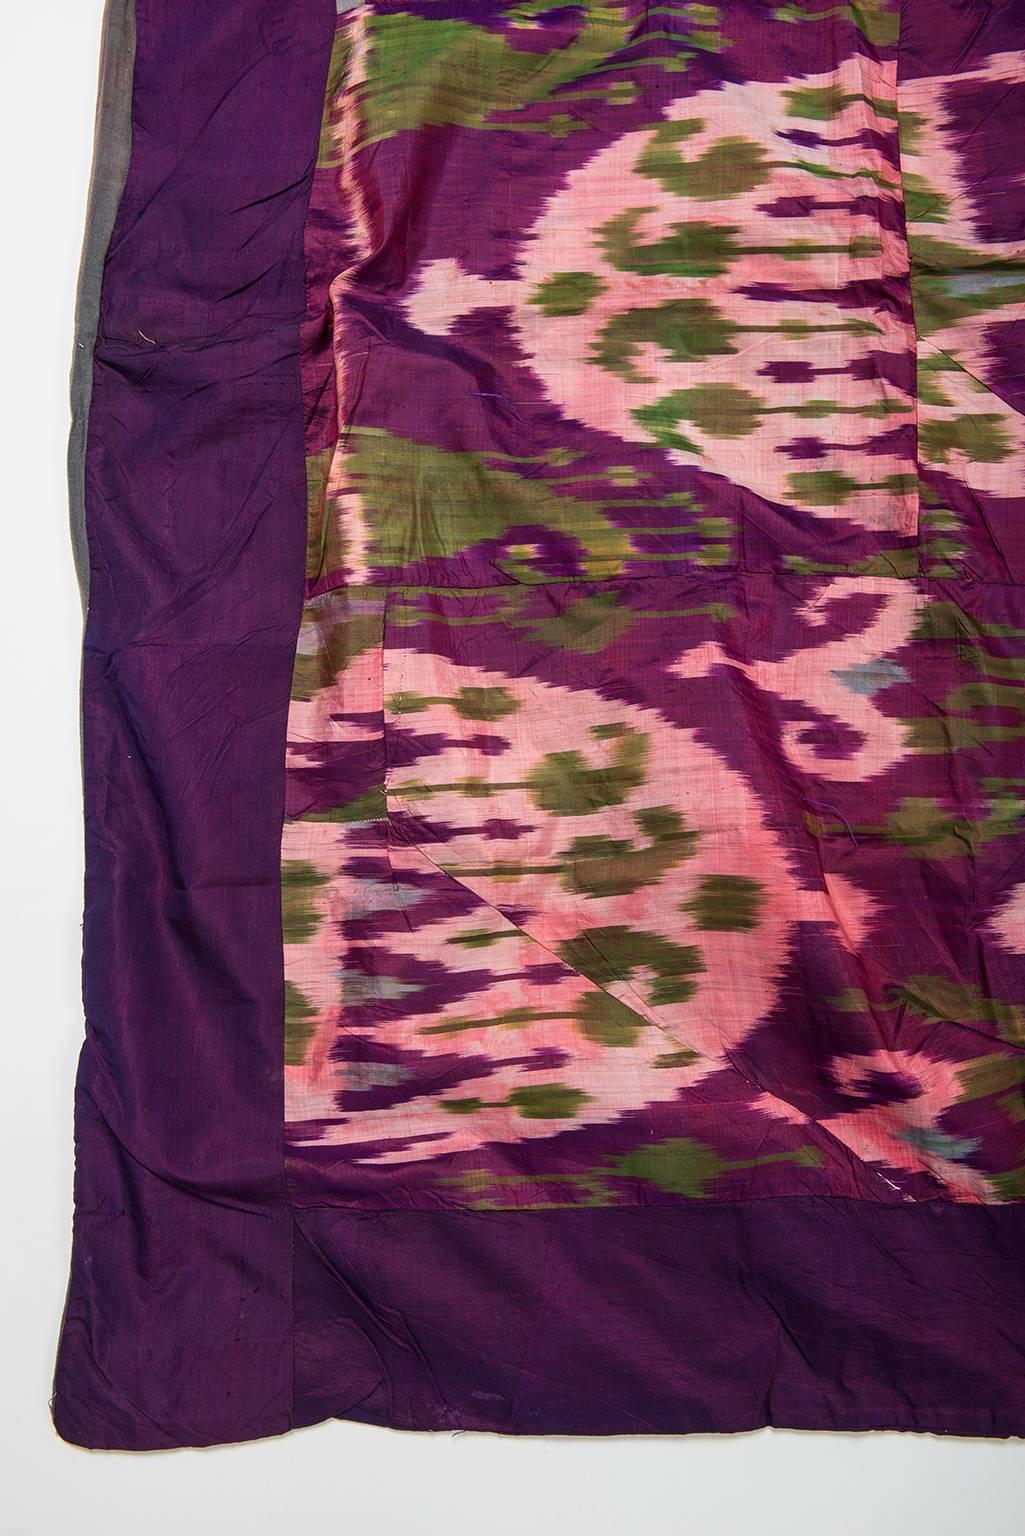 Hand-Woven Old   Ikat Bokara Silk Panel Textile , suitable for Table, Bed or Wall Hanging